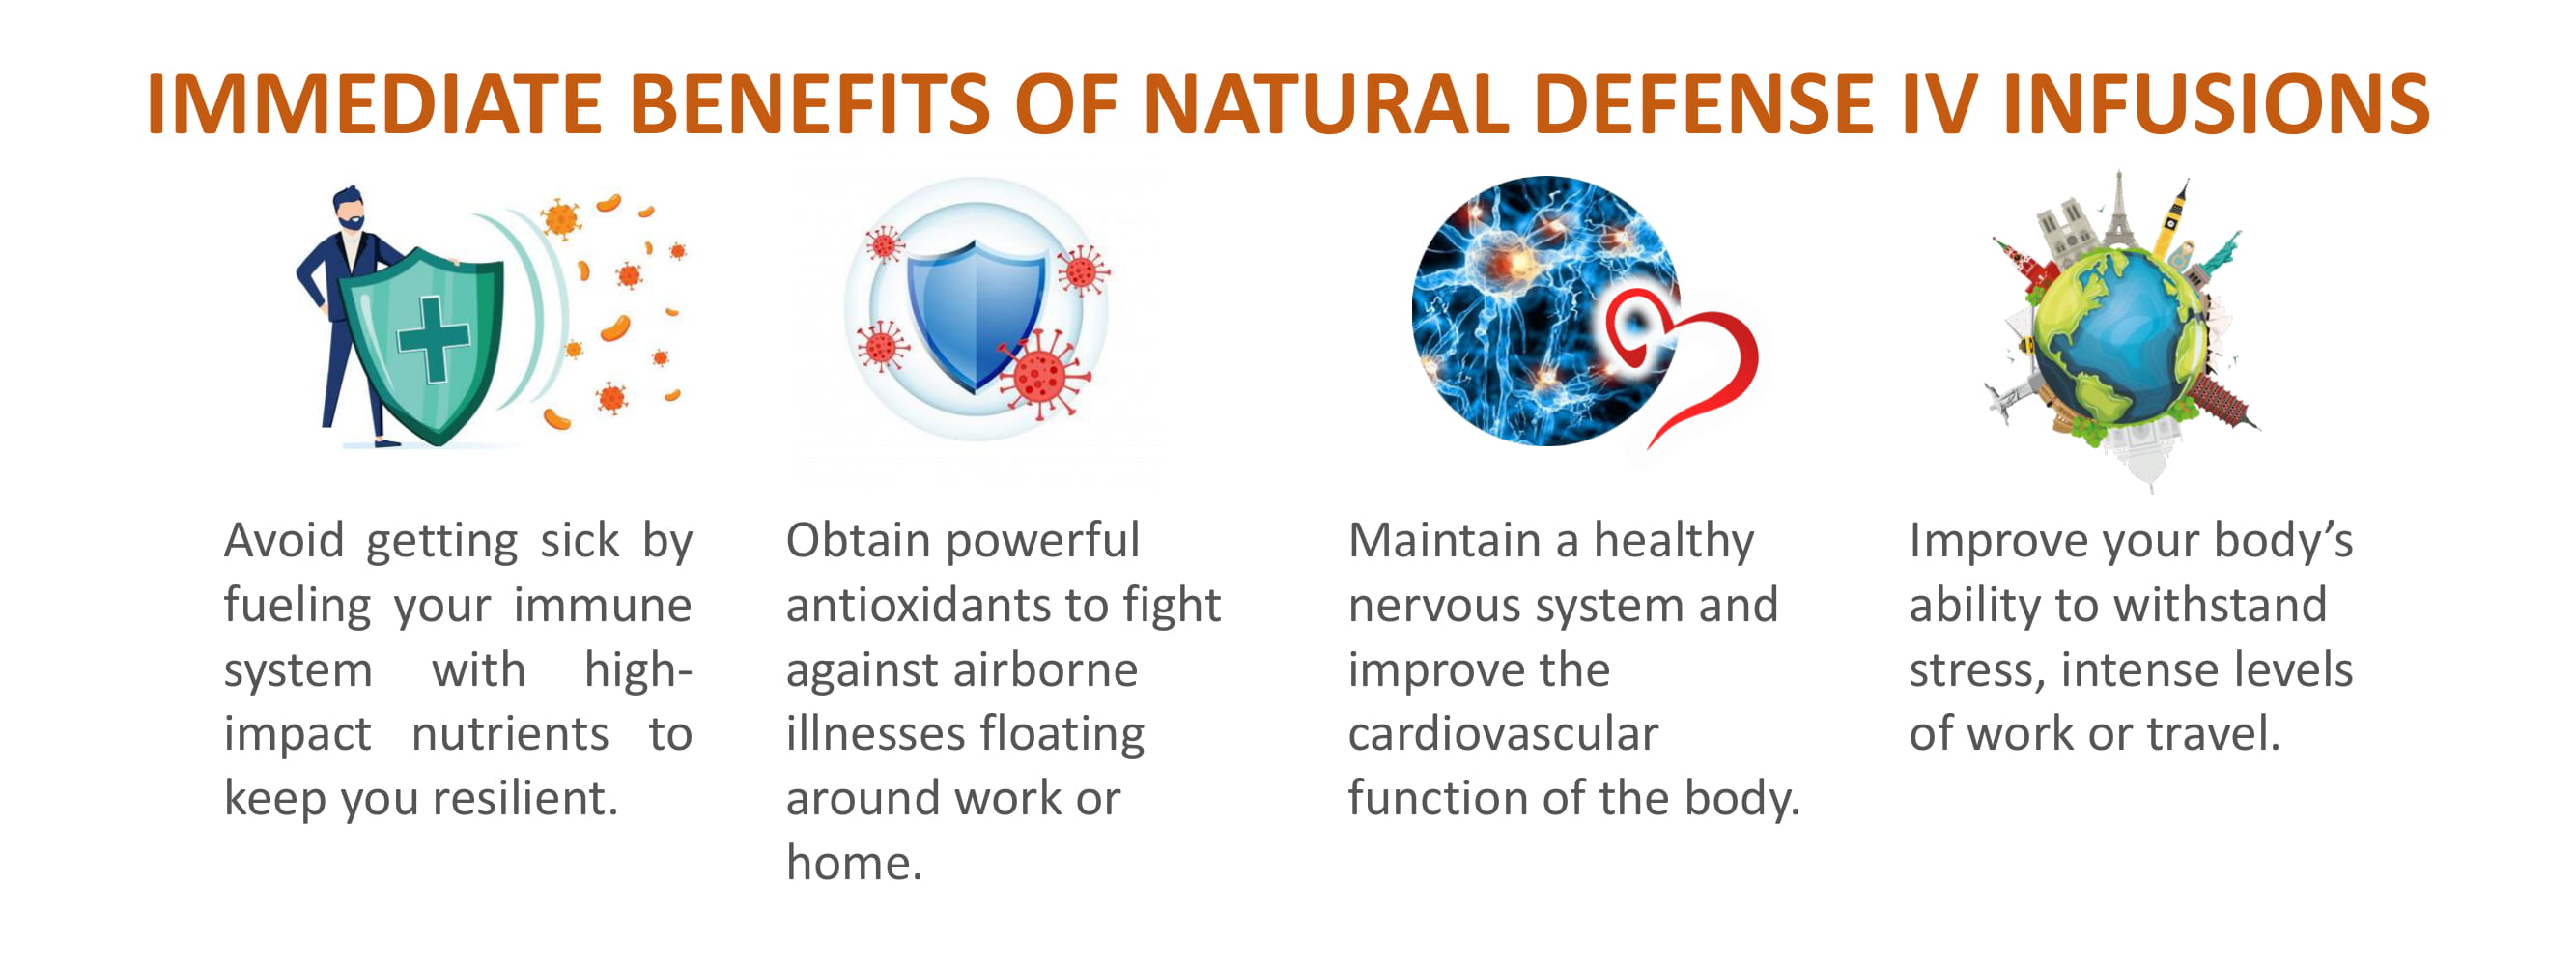 Benefits of Natural Defense IV Infusions in NJ